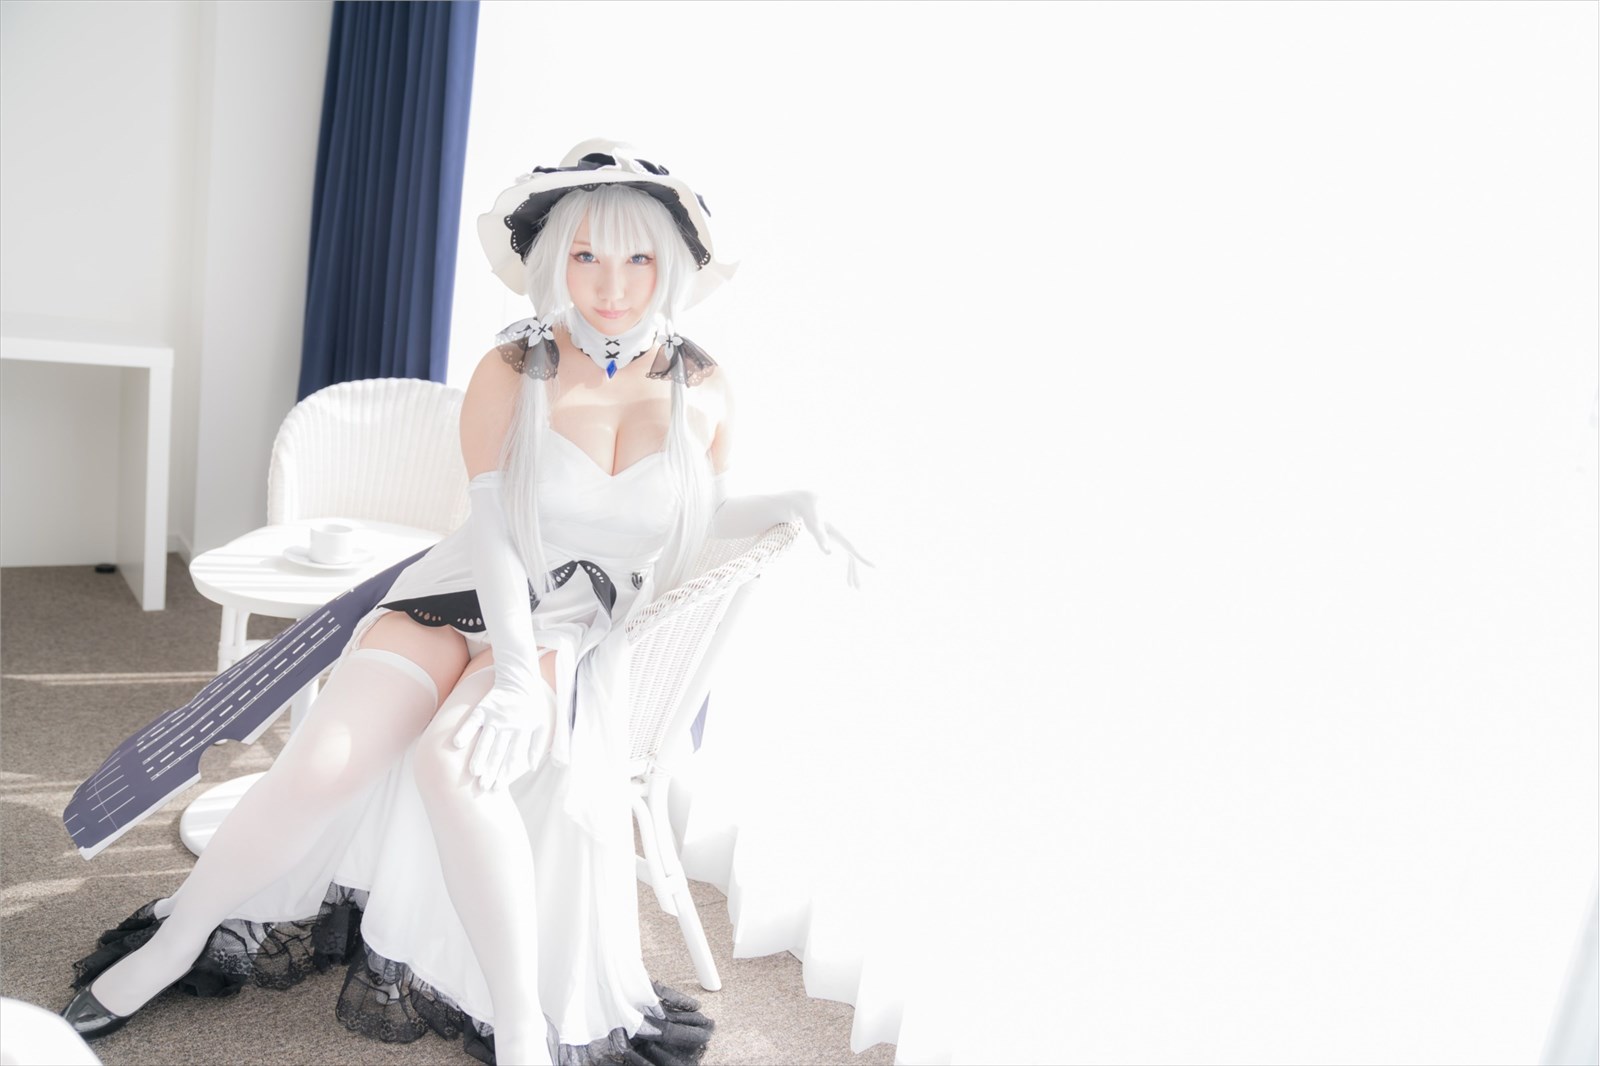 (Cosplay) (C94) Shooting Star (サク) Melty White 221P85MB1(1)